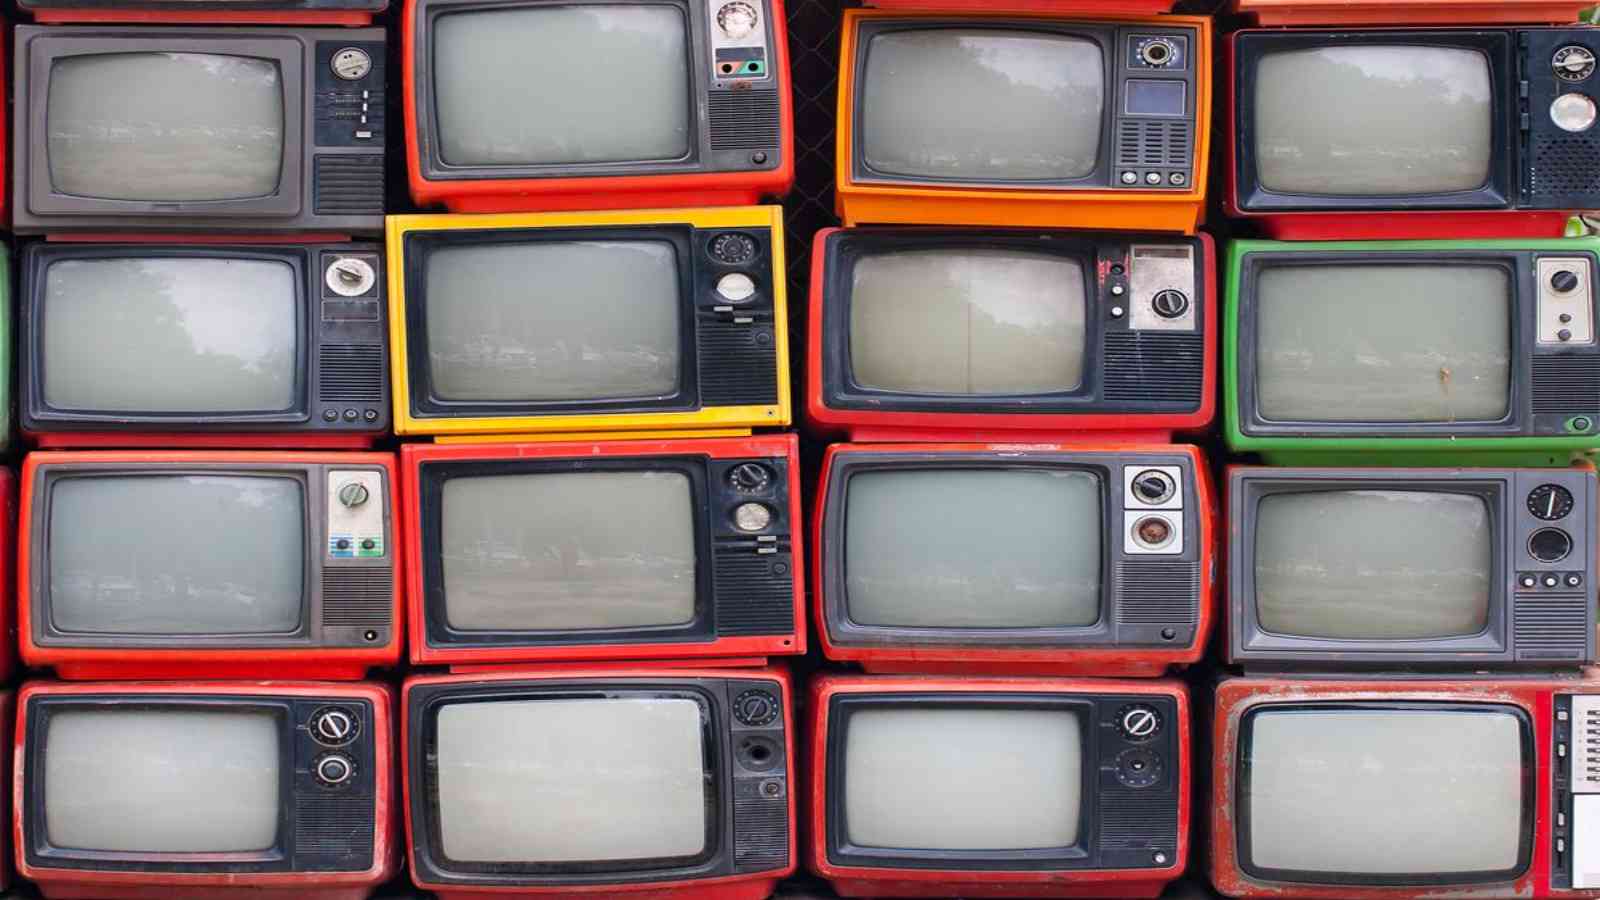 Analog to Digital TV Day 2023: Date, History, Facts about digital television